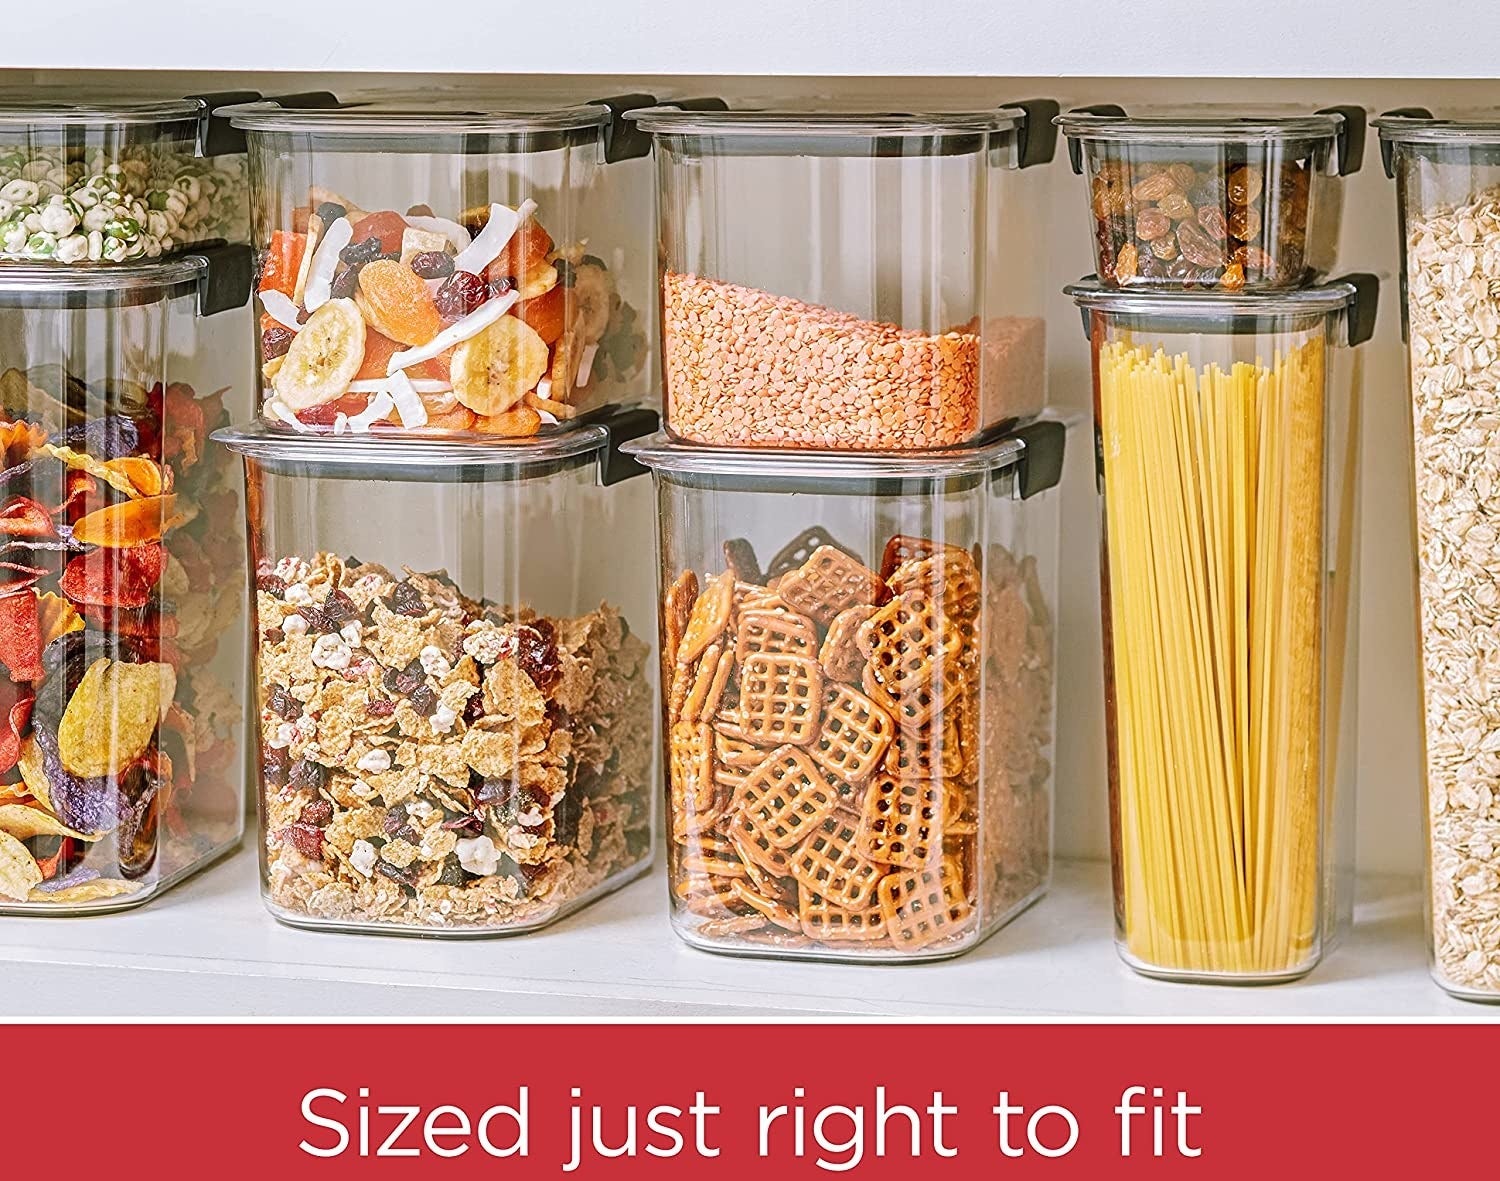 clear food storage containers filled with cereal, pasta, flour, and more